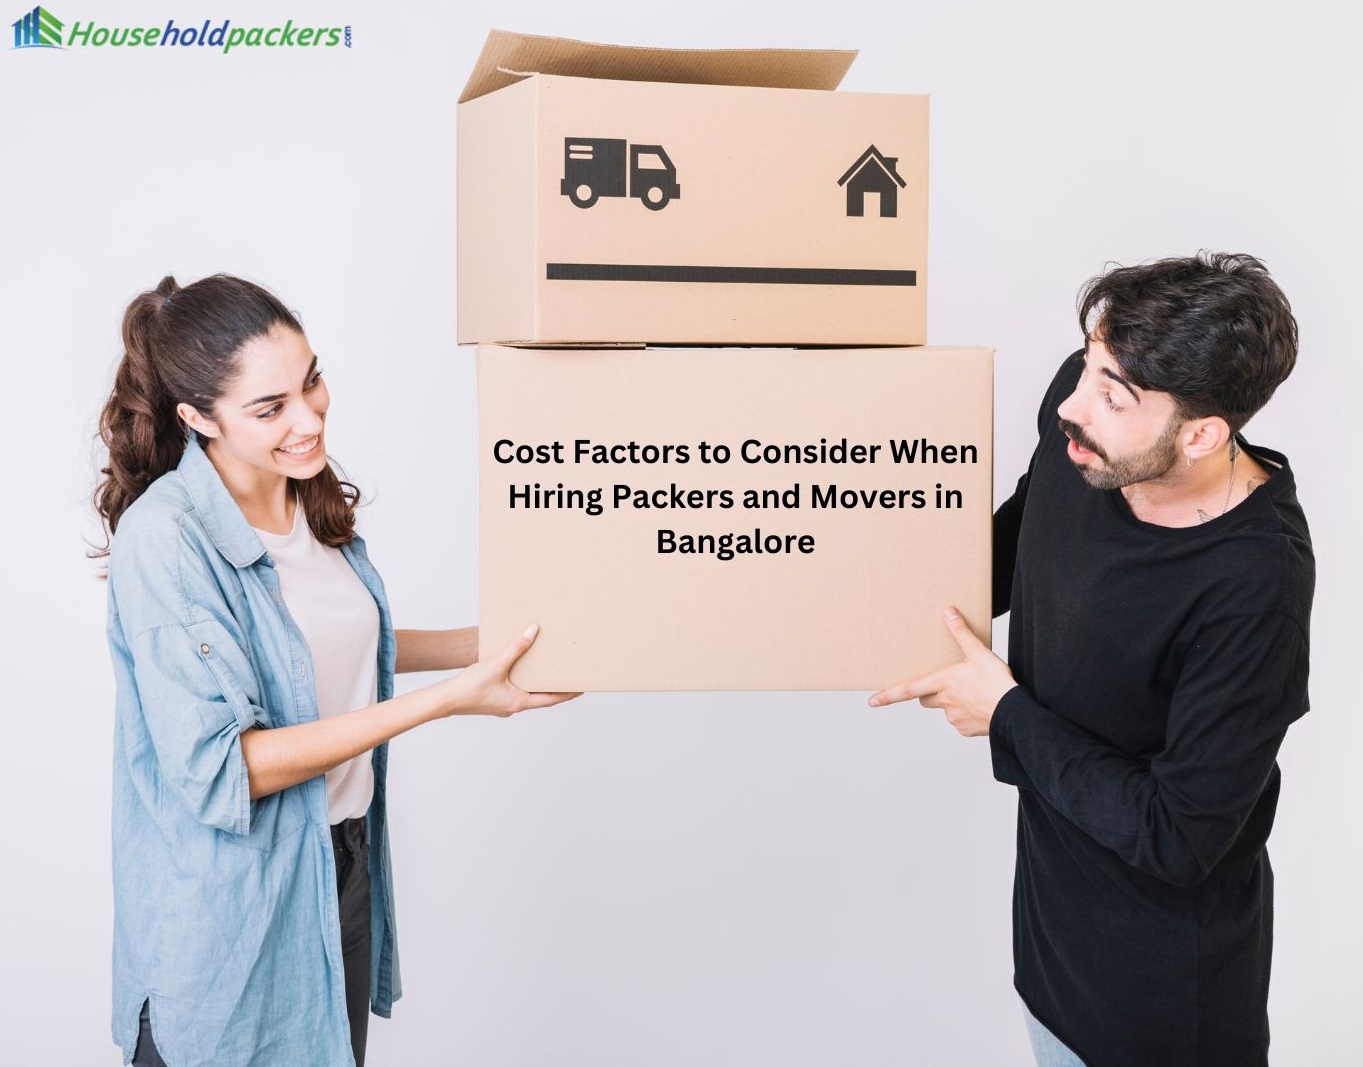 Cost Factors to Consider When Hiring Packers and Movers in Bangalore